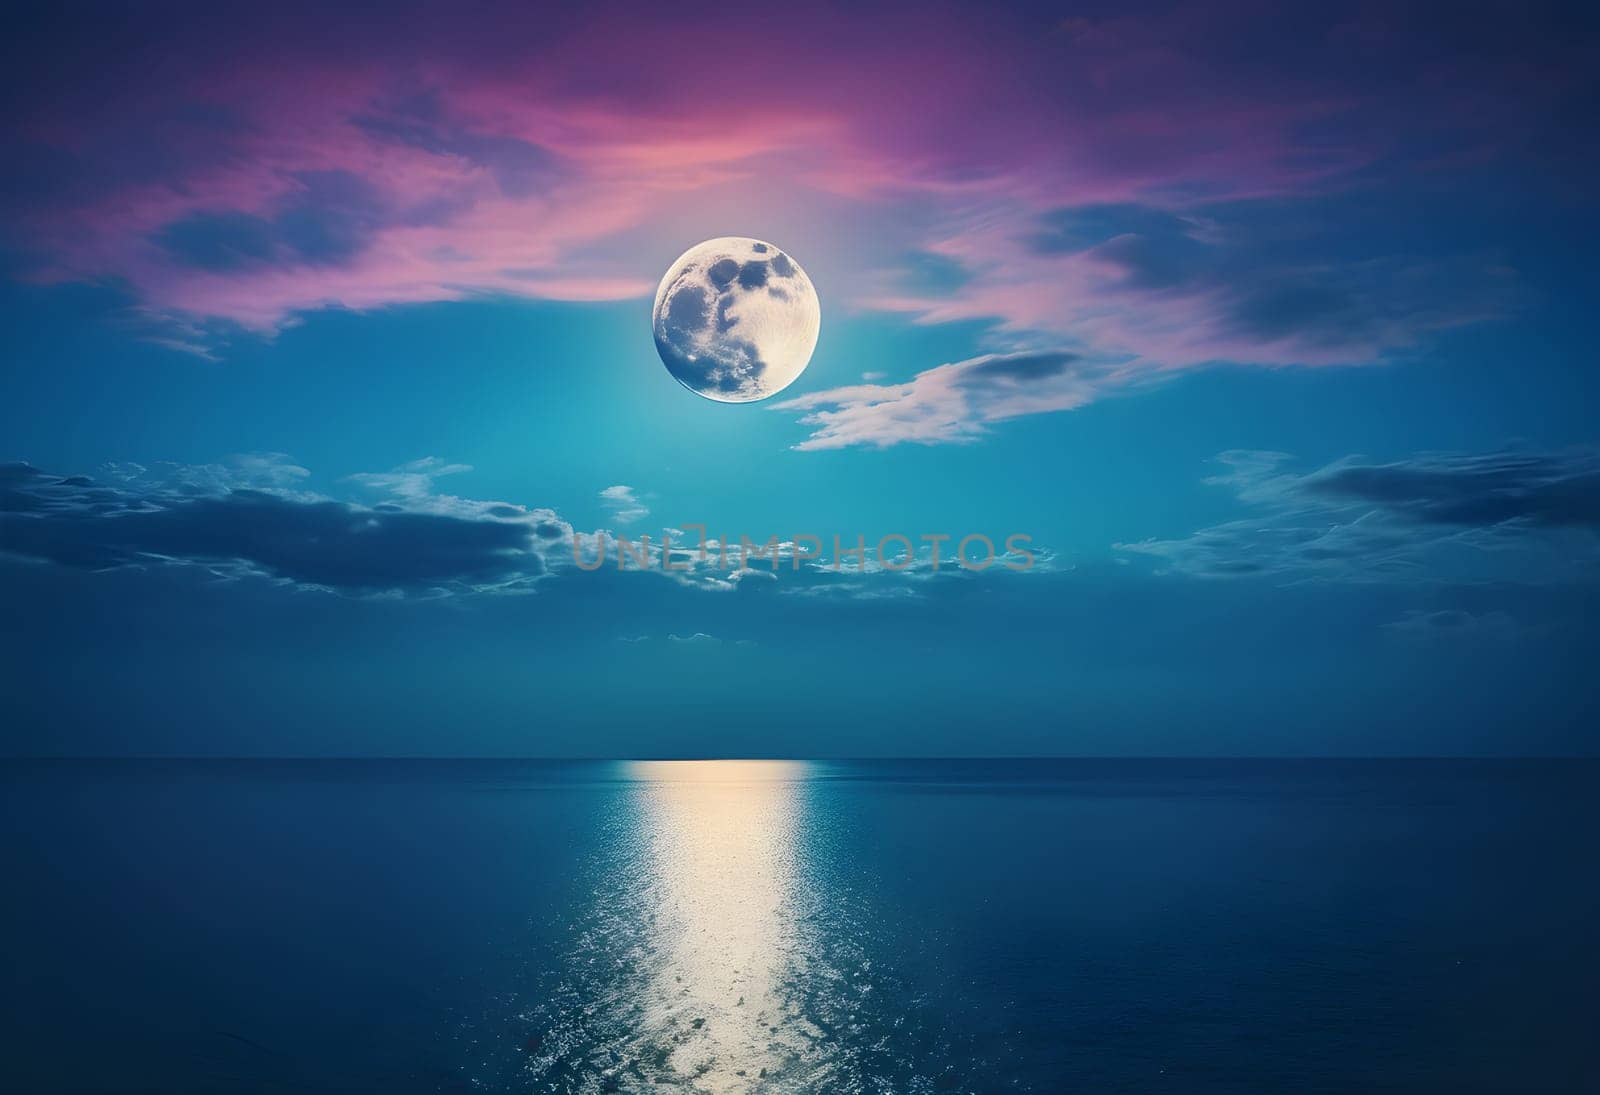 Celestial Panorama: Embracing the Beauty of the Moonlit Seascape by Petrichor